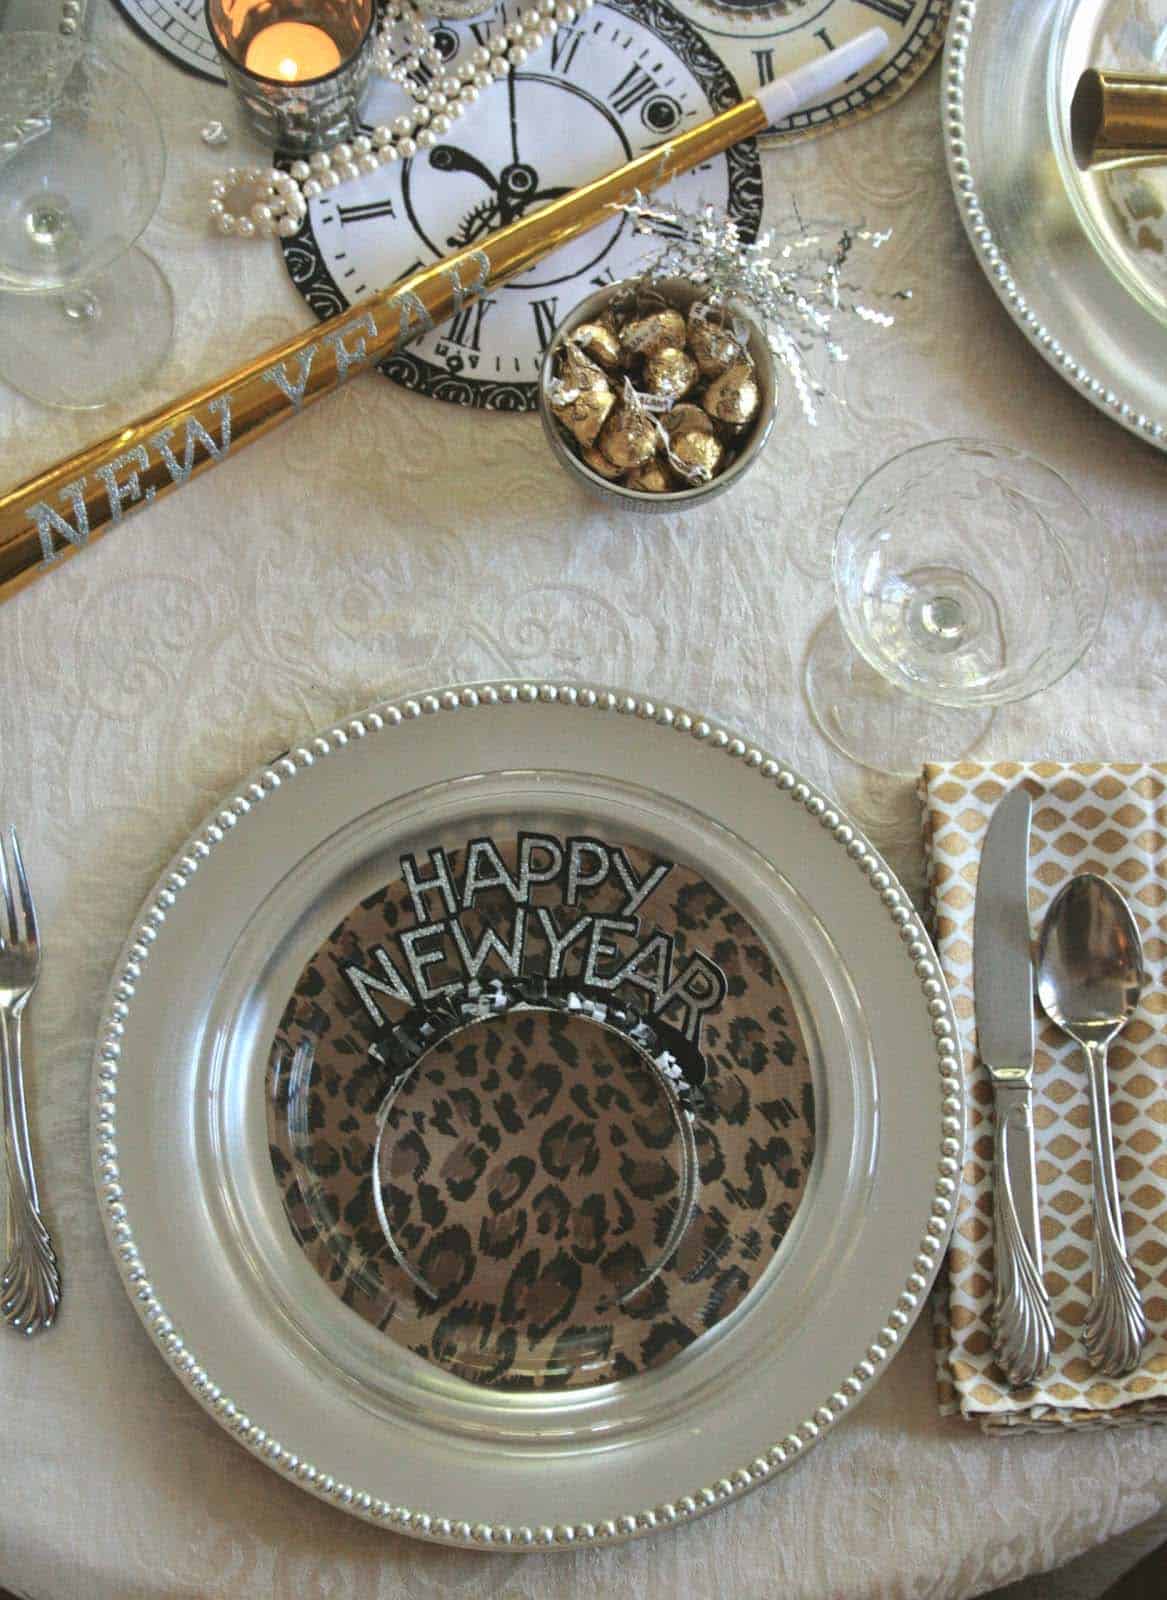 Glamorous Party Table Settings For New Years Eve-12-1 Kindesign